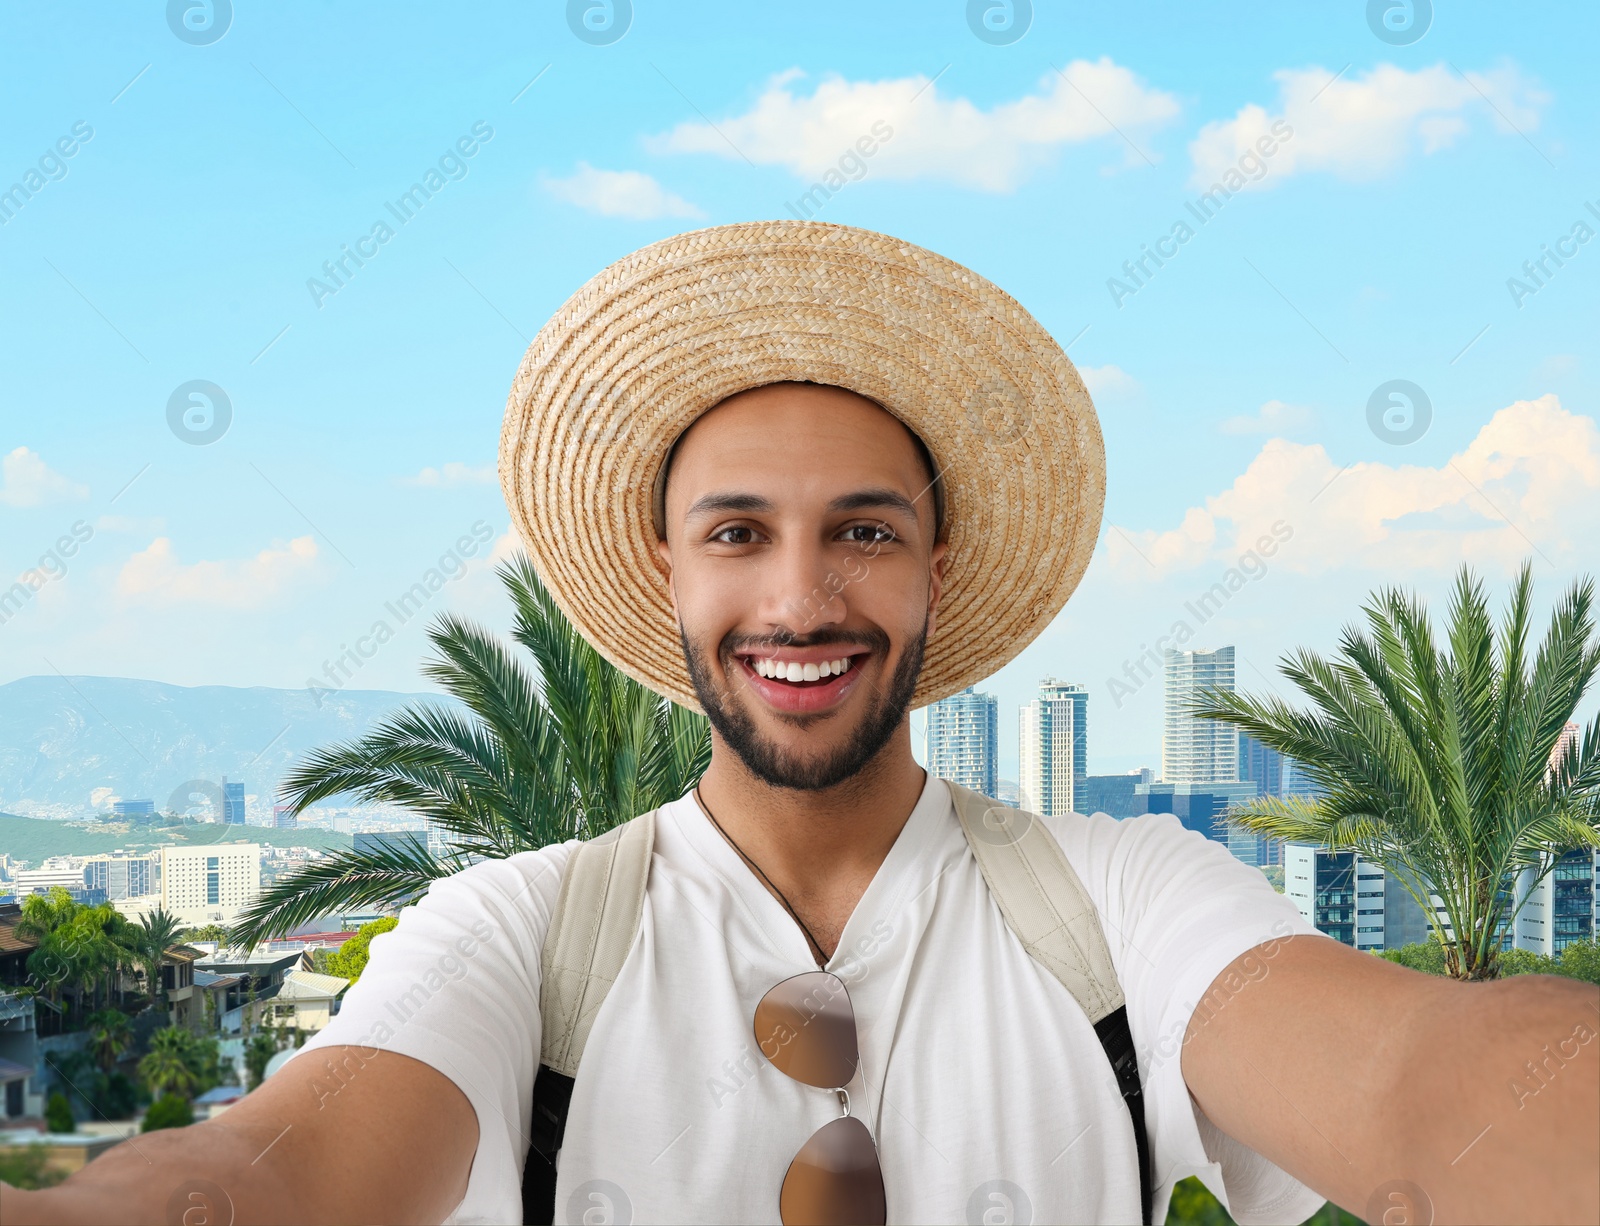 Image of Smiling young man in straw hat taking selfie against city with buildings and beautiful palms